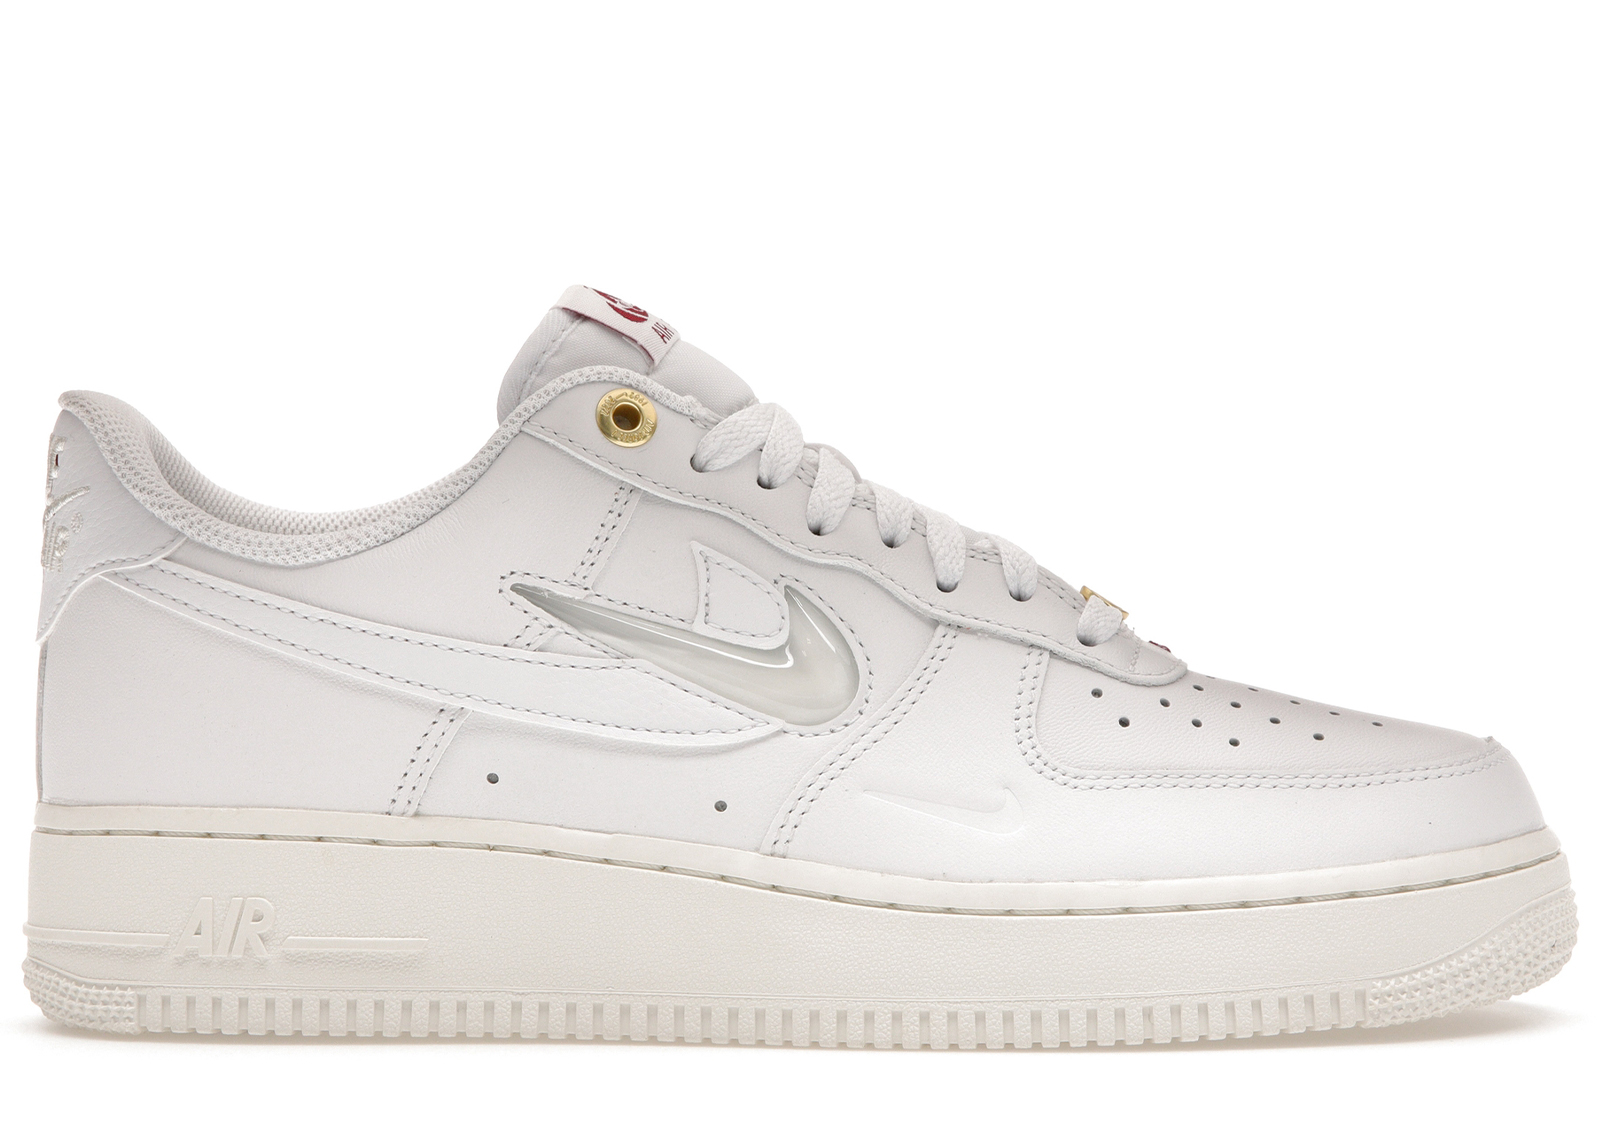 Nike Air Force 1 Low '07 Join Forces